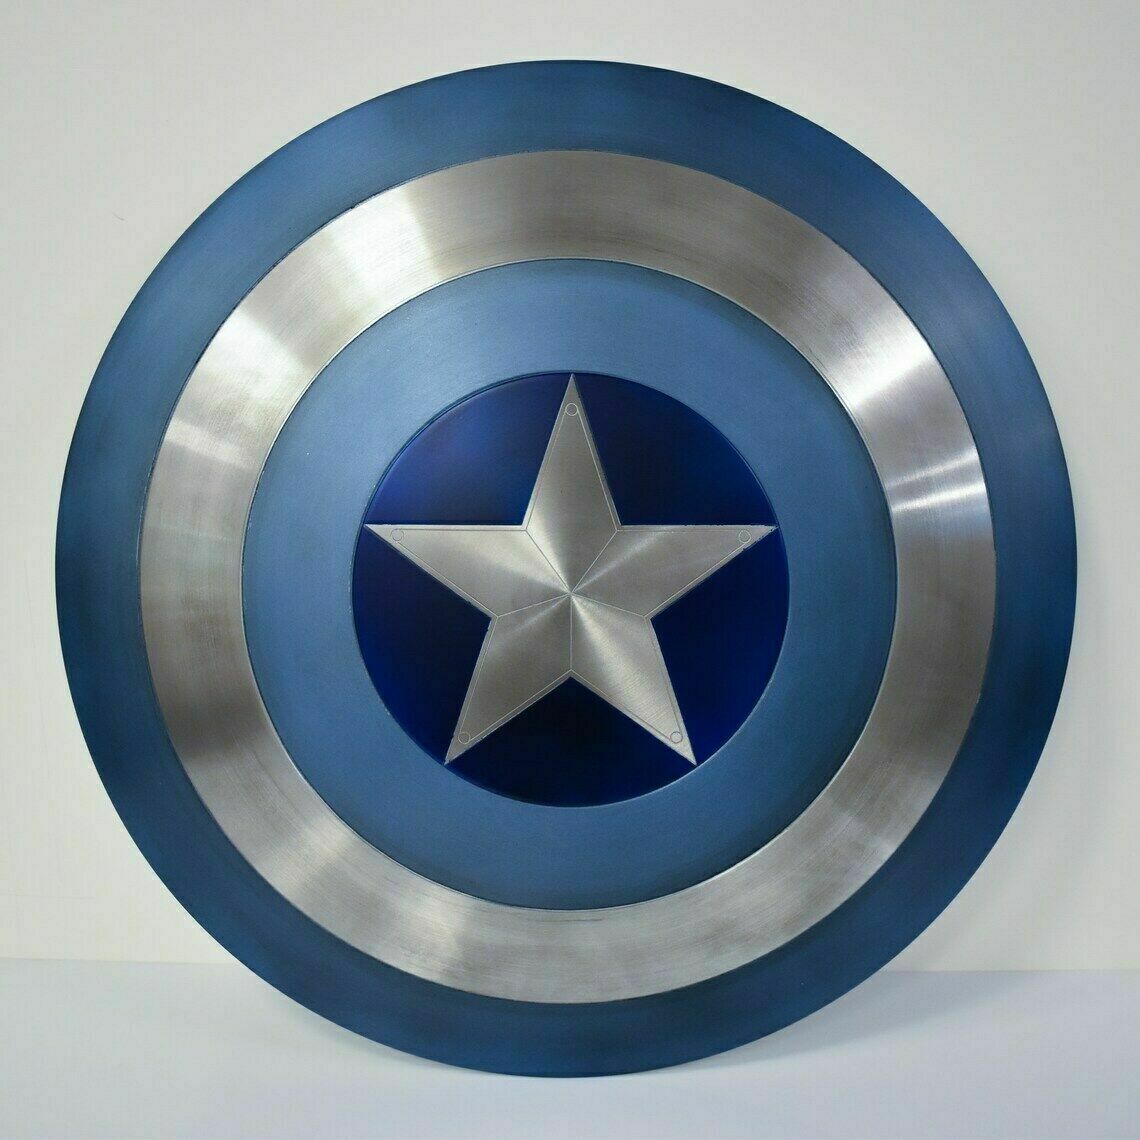 Captain America 22'' Stealth Shield Metal Replica - The Winter Soldier  Collectible Marvel Prop